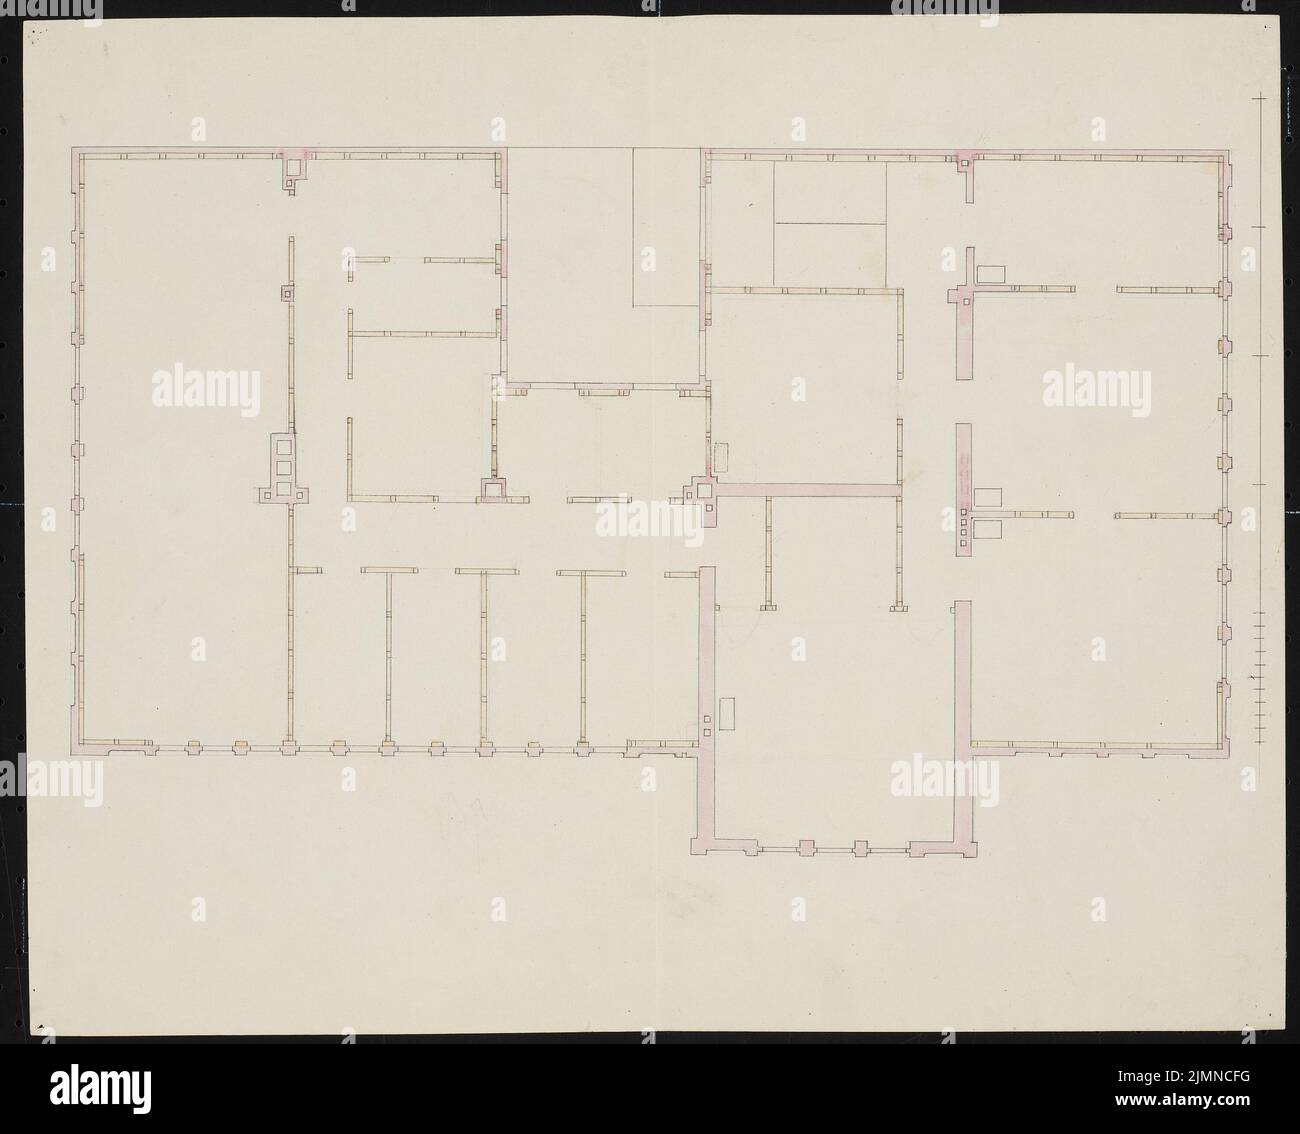 Knoblauch Eduard (1801-1865), Leipziger apartment building in Berlin (approx. 1839): floor plan attic. Tusche watercolor, 35.2 x 43.9 cm (including scan edges) Stock Photo